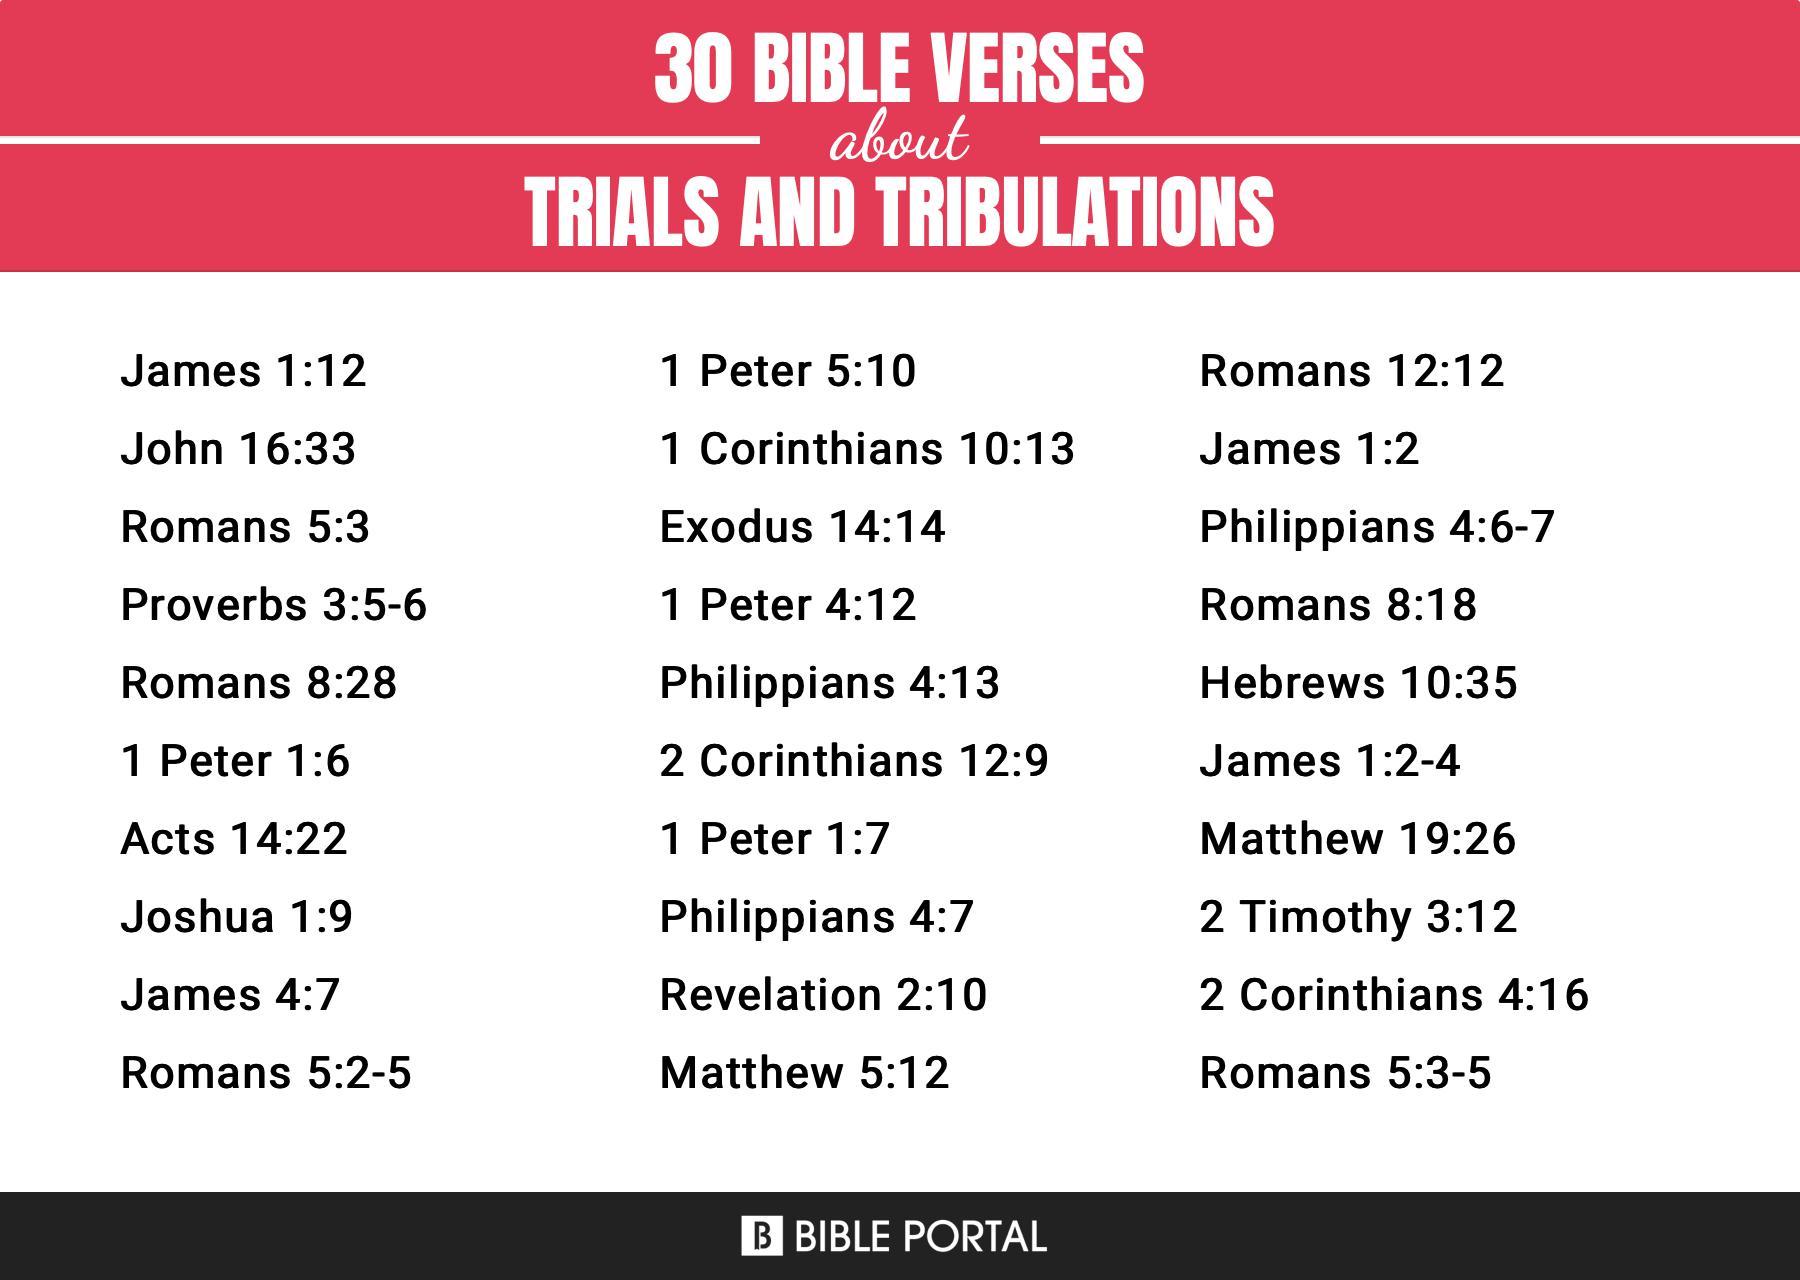 What Does the Bible Say about Trials And Tribulations?